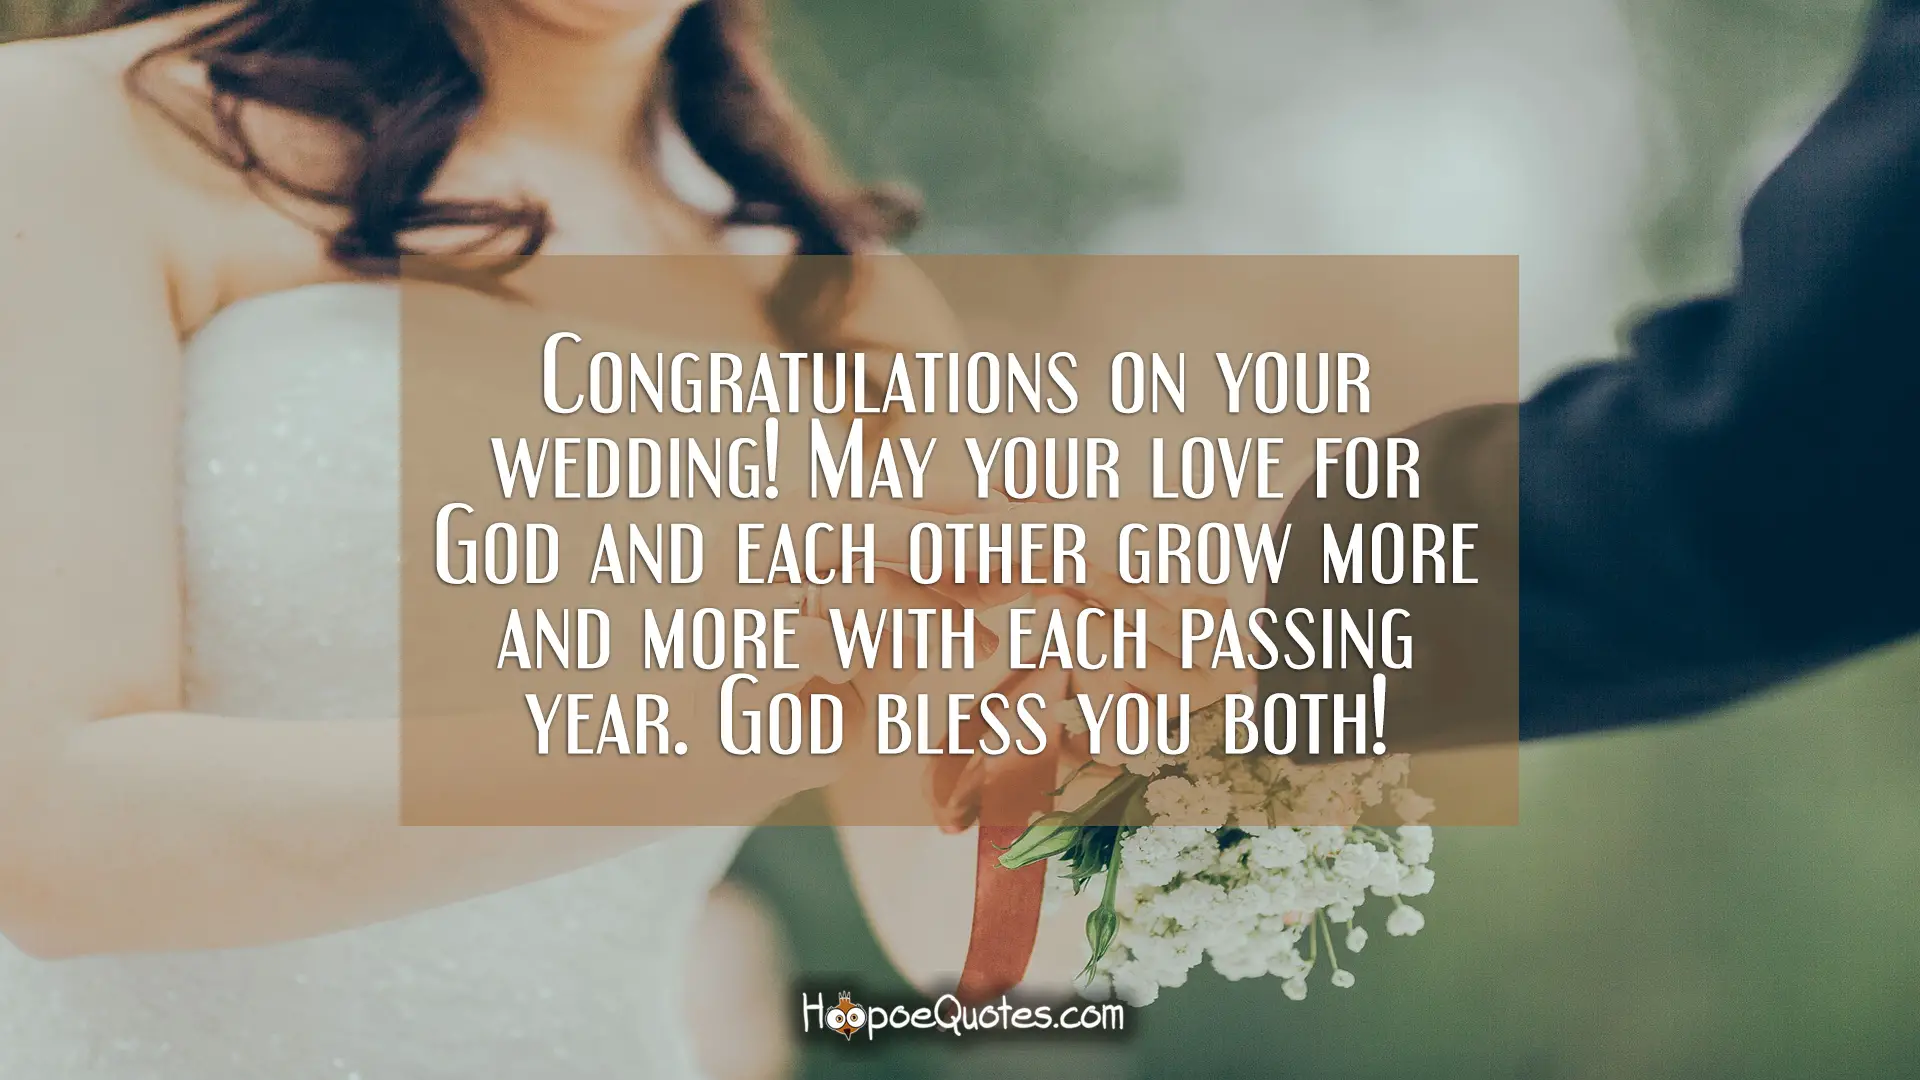 37+ May God Bless Your Marriage Quotes For Newly Married Couple